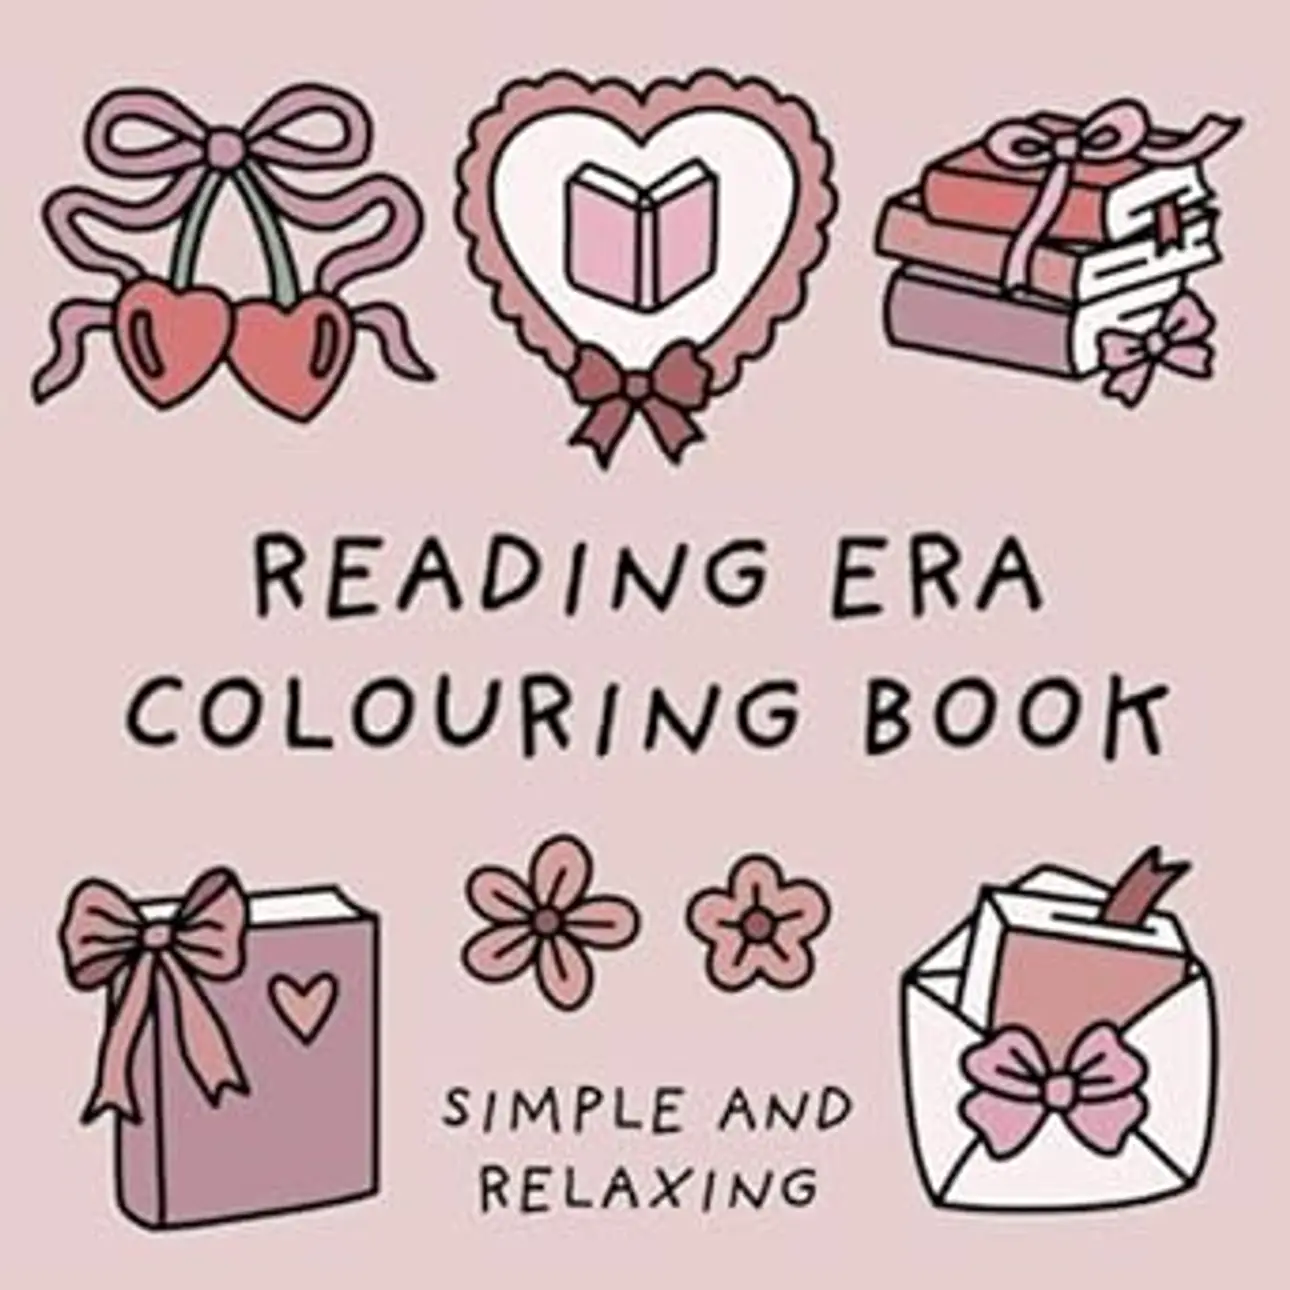 Reading Era Colouring Book (Simple and Relaxing Bold Designs for Adults & Children) (Simple and Relaxing Colouring Books) : Design Studio, Mary Hart, Hart, Mary: Amazon.de: Bücher